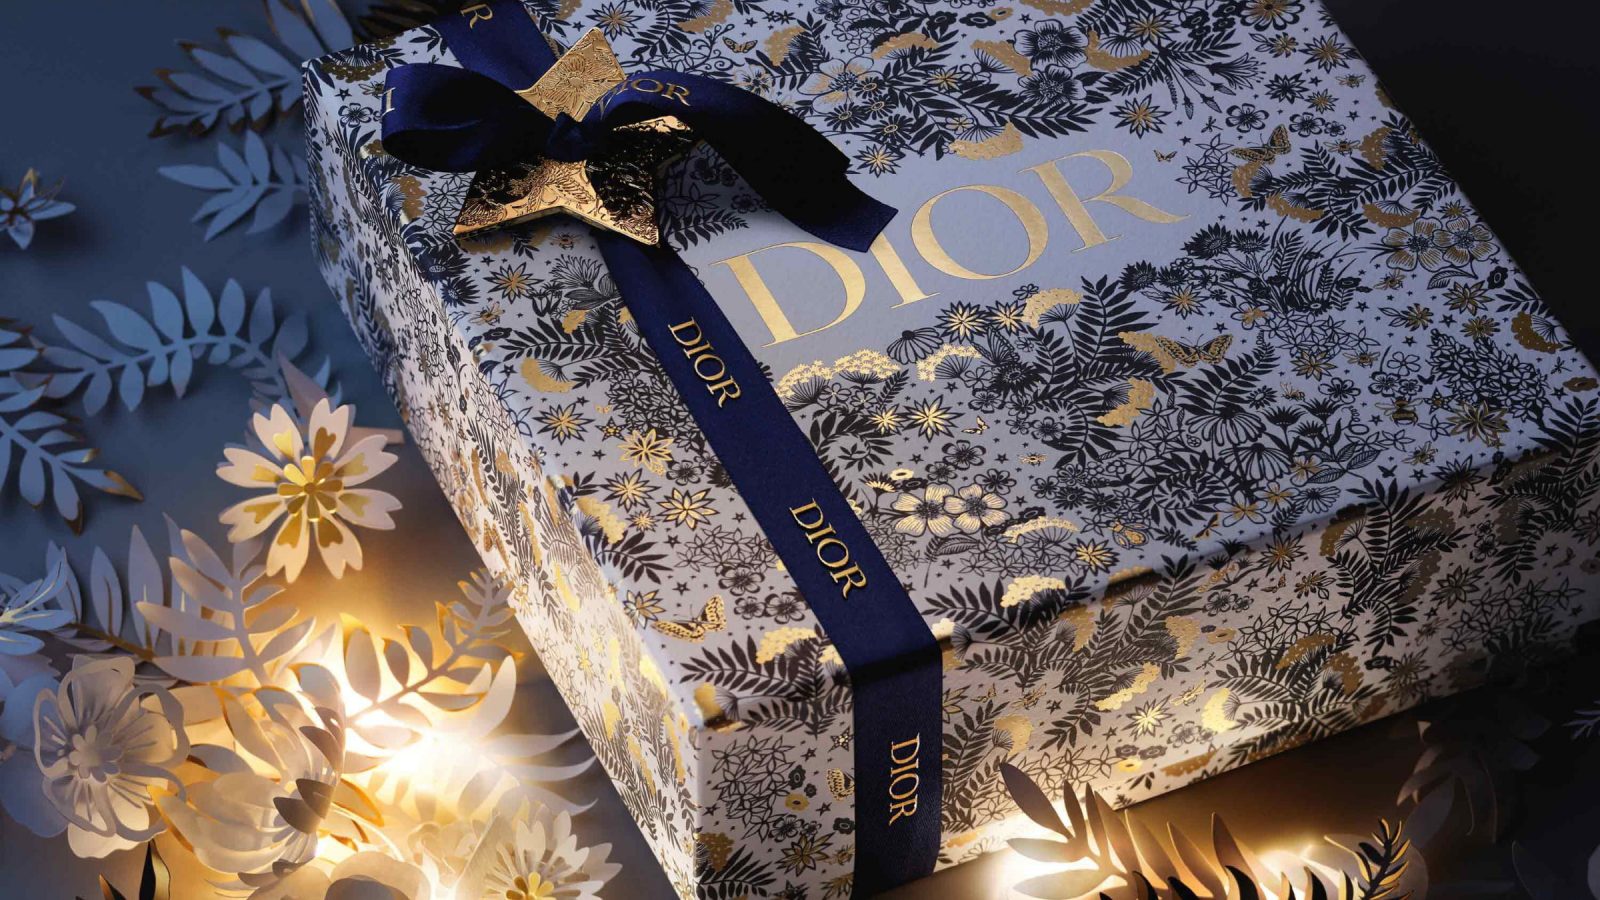 Dior fashion house suggests chic fashion gifts for this year's christmas season